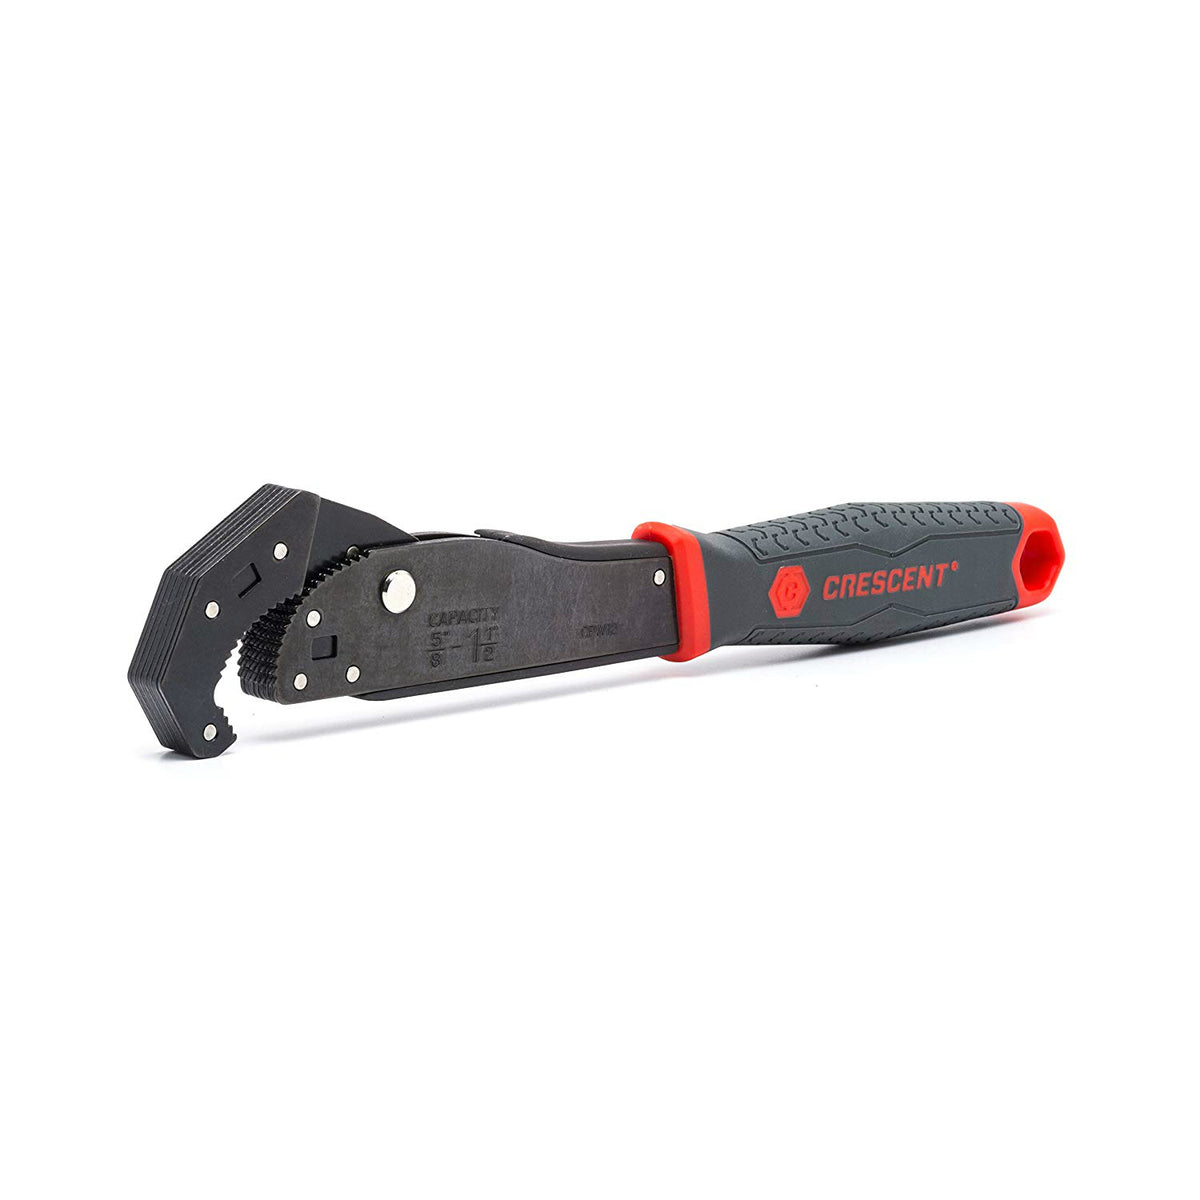 Crescent CPW12 Self-Adjusting Dual Material Pipe Wrench, 12"